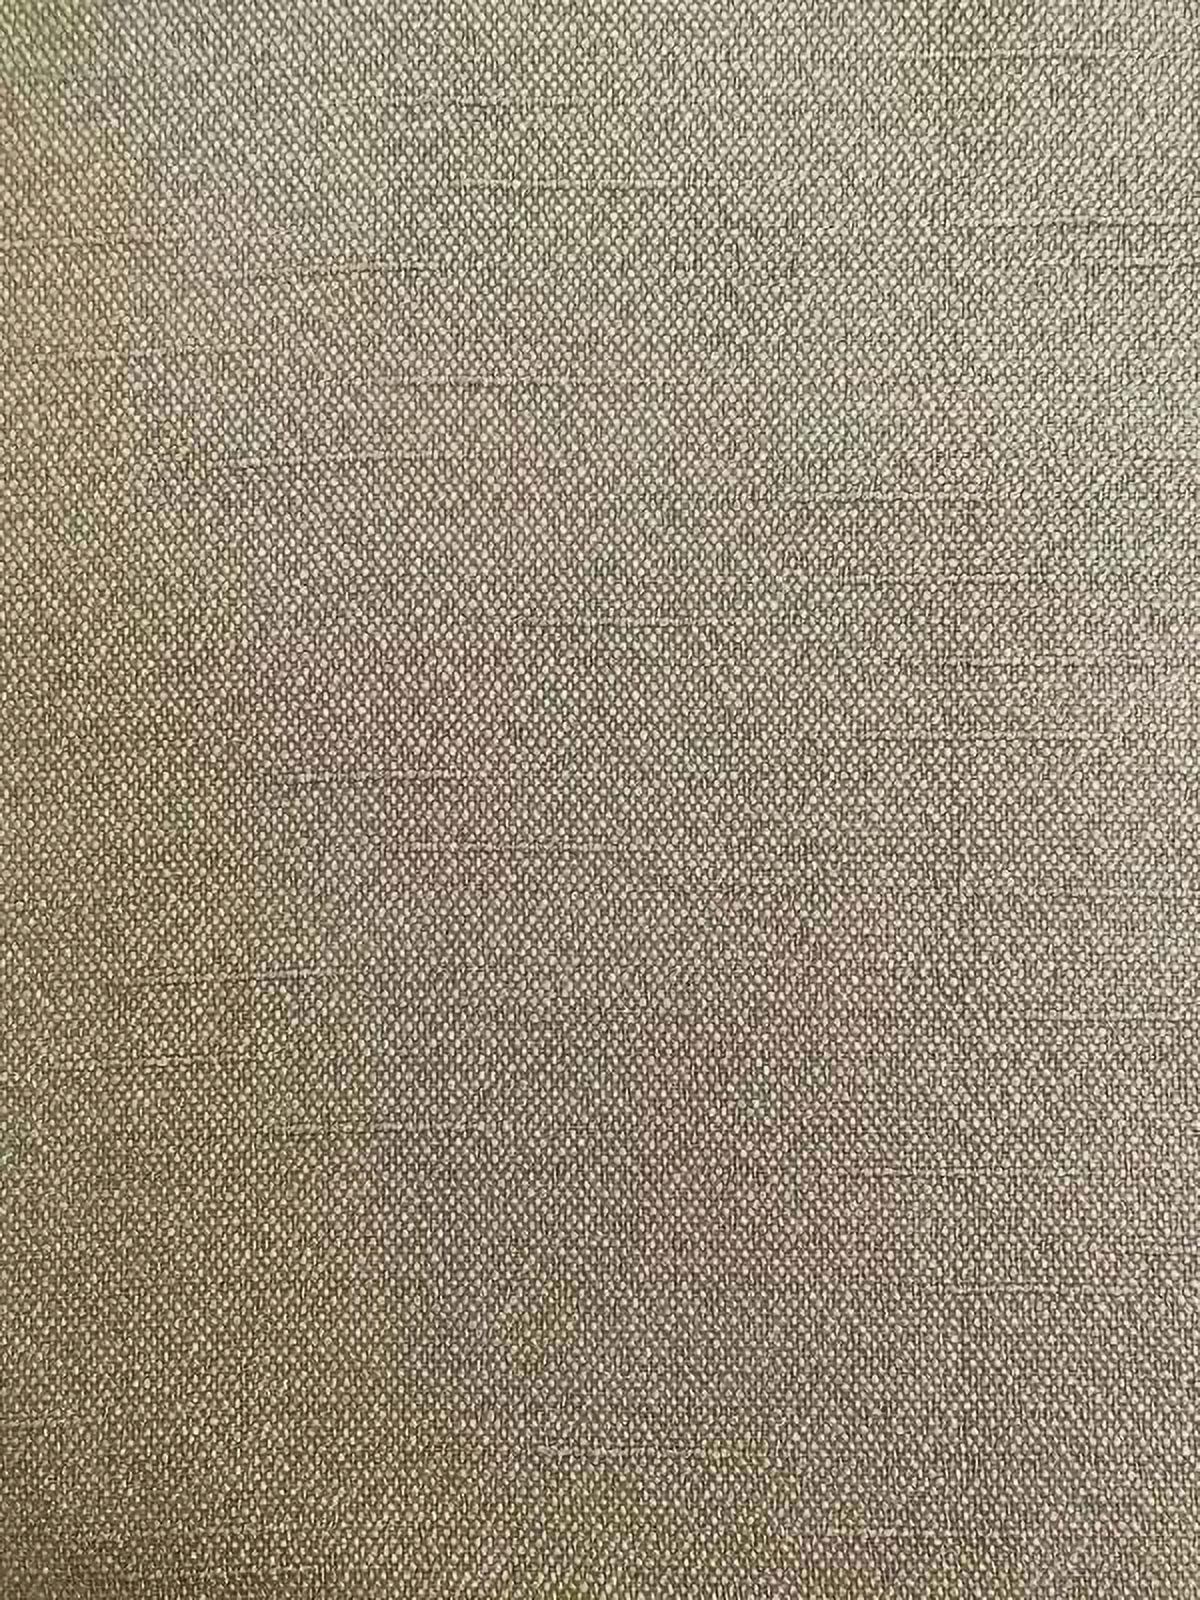 Better Homes & Gardens Basketweave Curtain Panel, 50" x 84", Beige - image 5 of 6